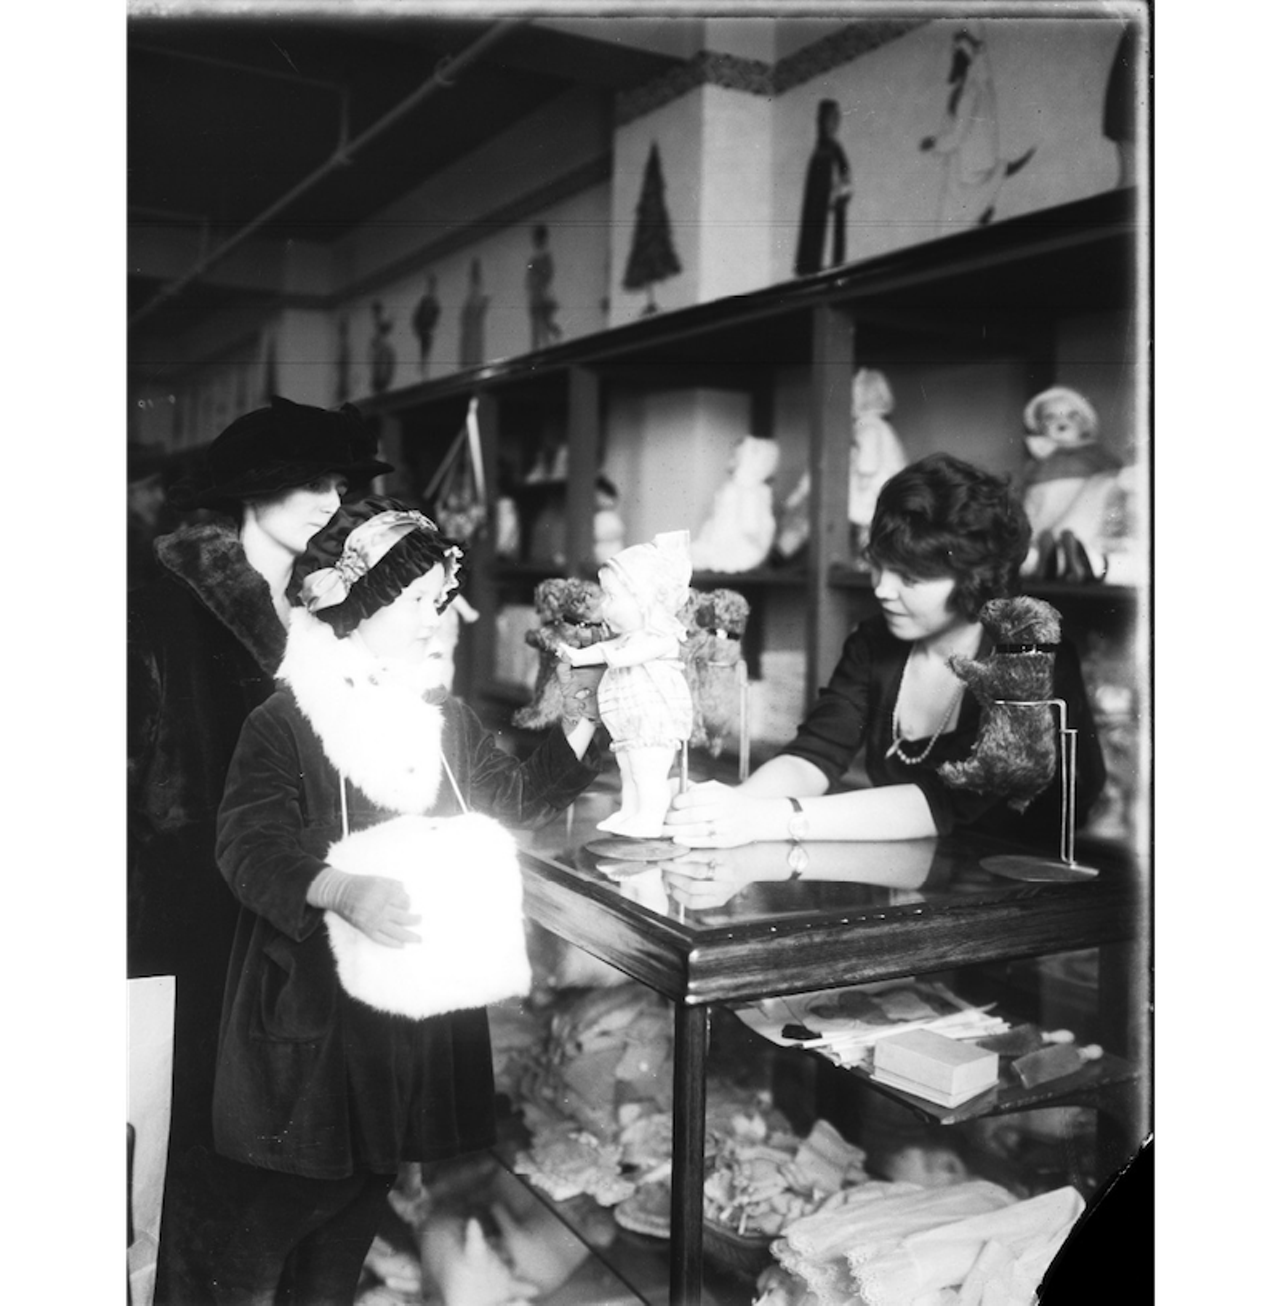 Children in toy store.
All photos courtesy of Walter P. Reuther Library, Archives of Labor and Urban Affairs, Wayne State University